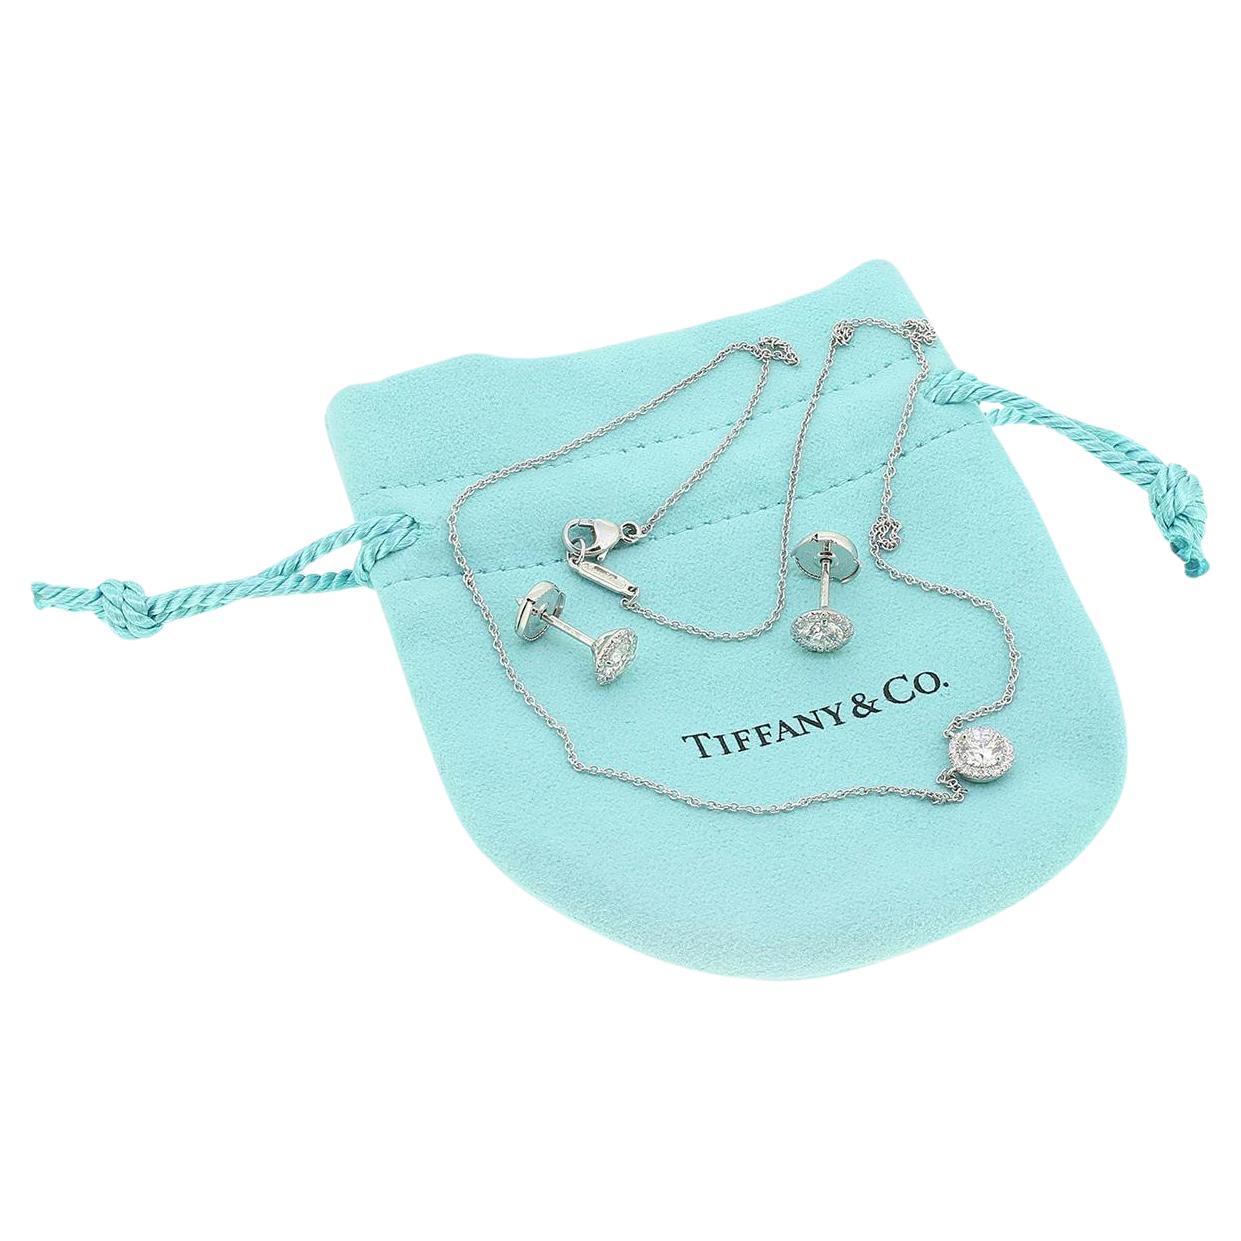 Tiffany & Co. Soleste Diamond Necklace and Earrings Set For Sale